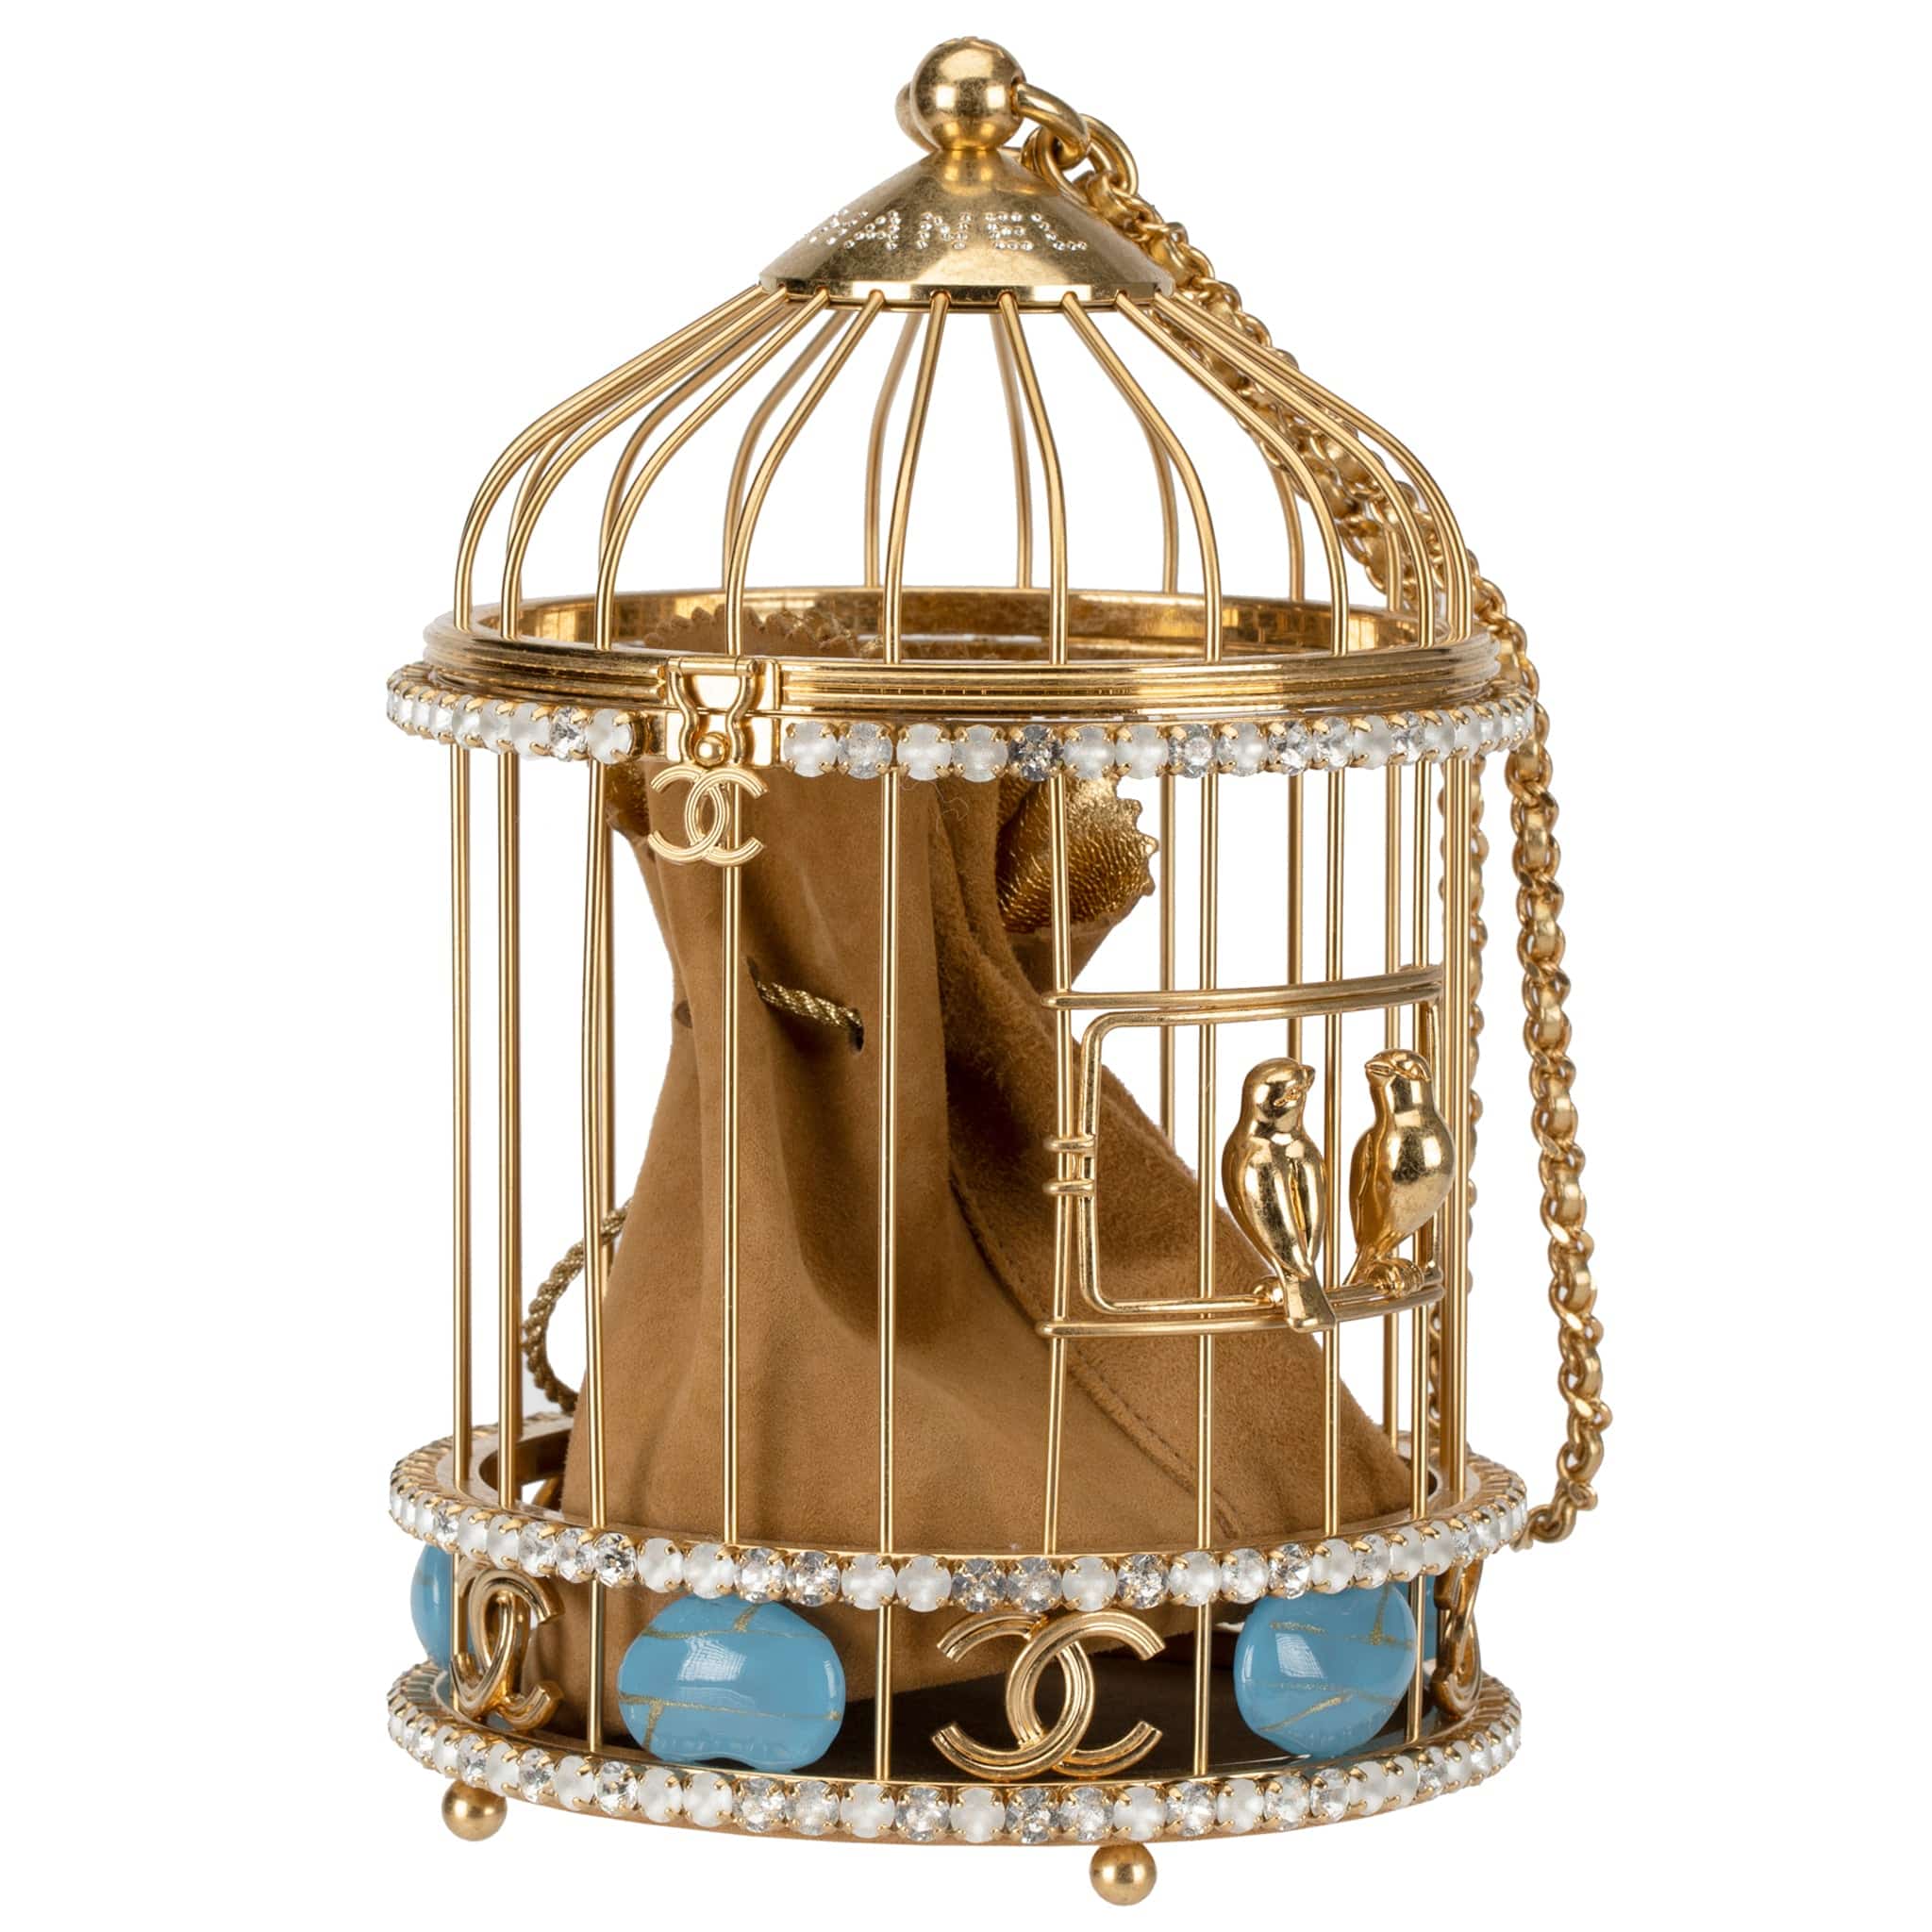 CHANEL MINAUDIÈRE LIMITED EDITION LOVE BIRD CAGE AGED GOLD HARDWARE - On Repeat